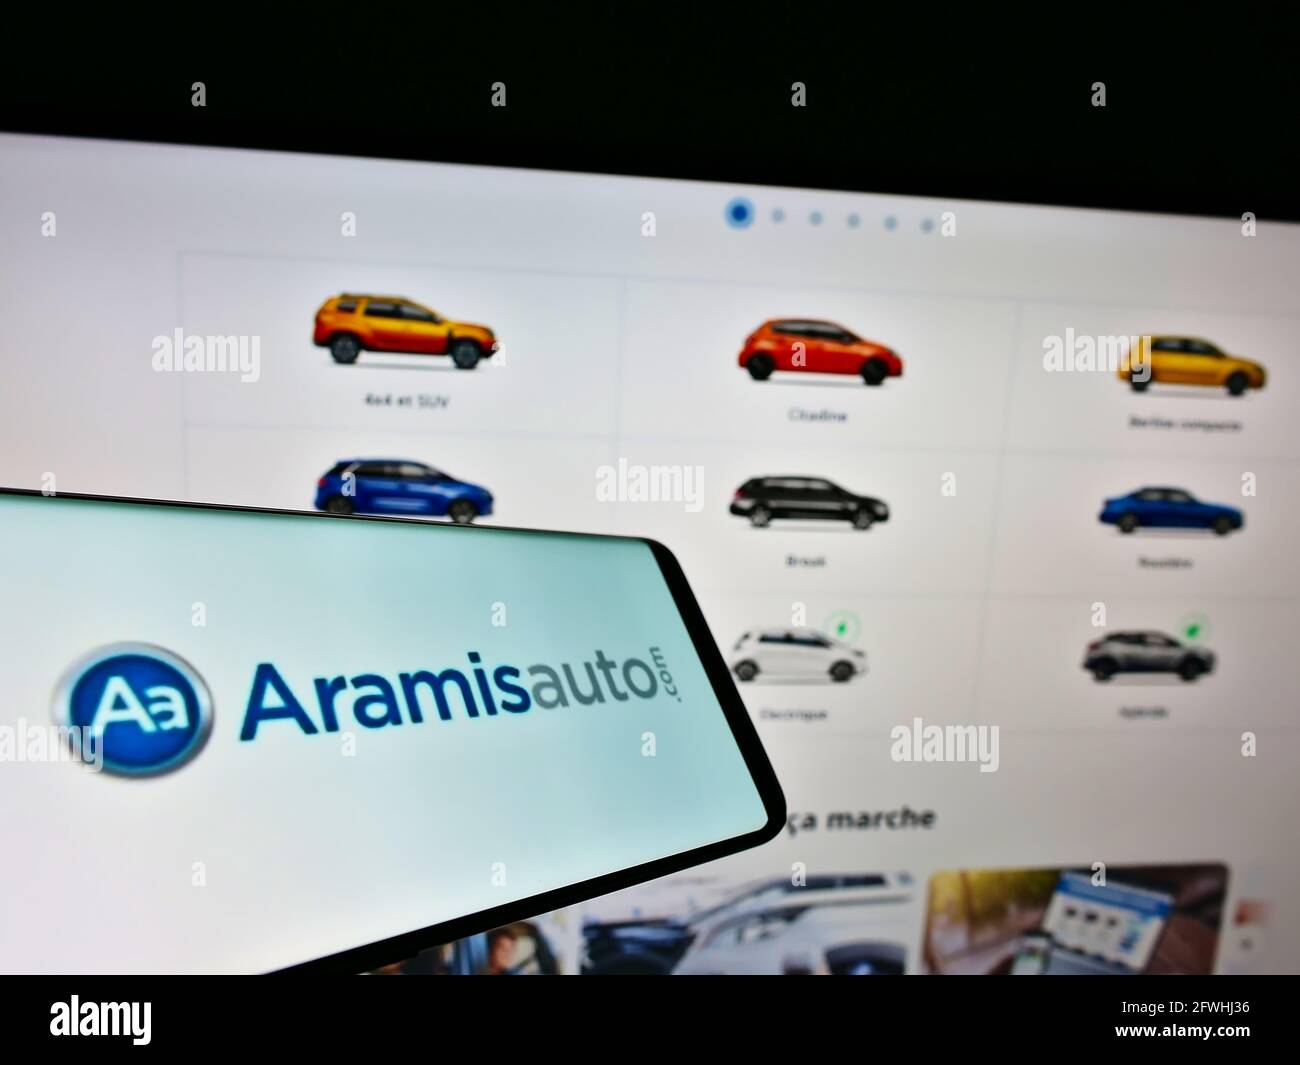 Cellphone with logo of French online car dealer Aramis SAS (Aramisauto) on screen in front of website. Focus on center-right og phone display. Stock Photo